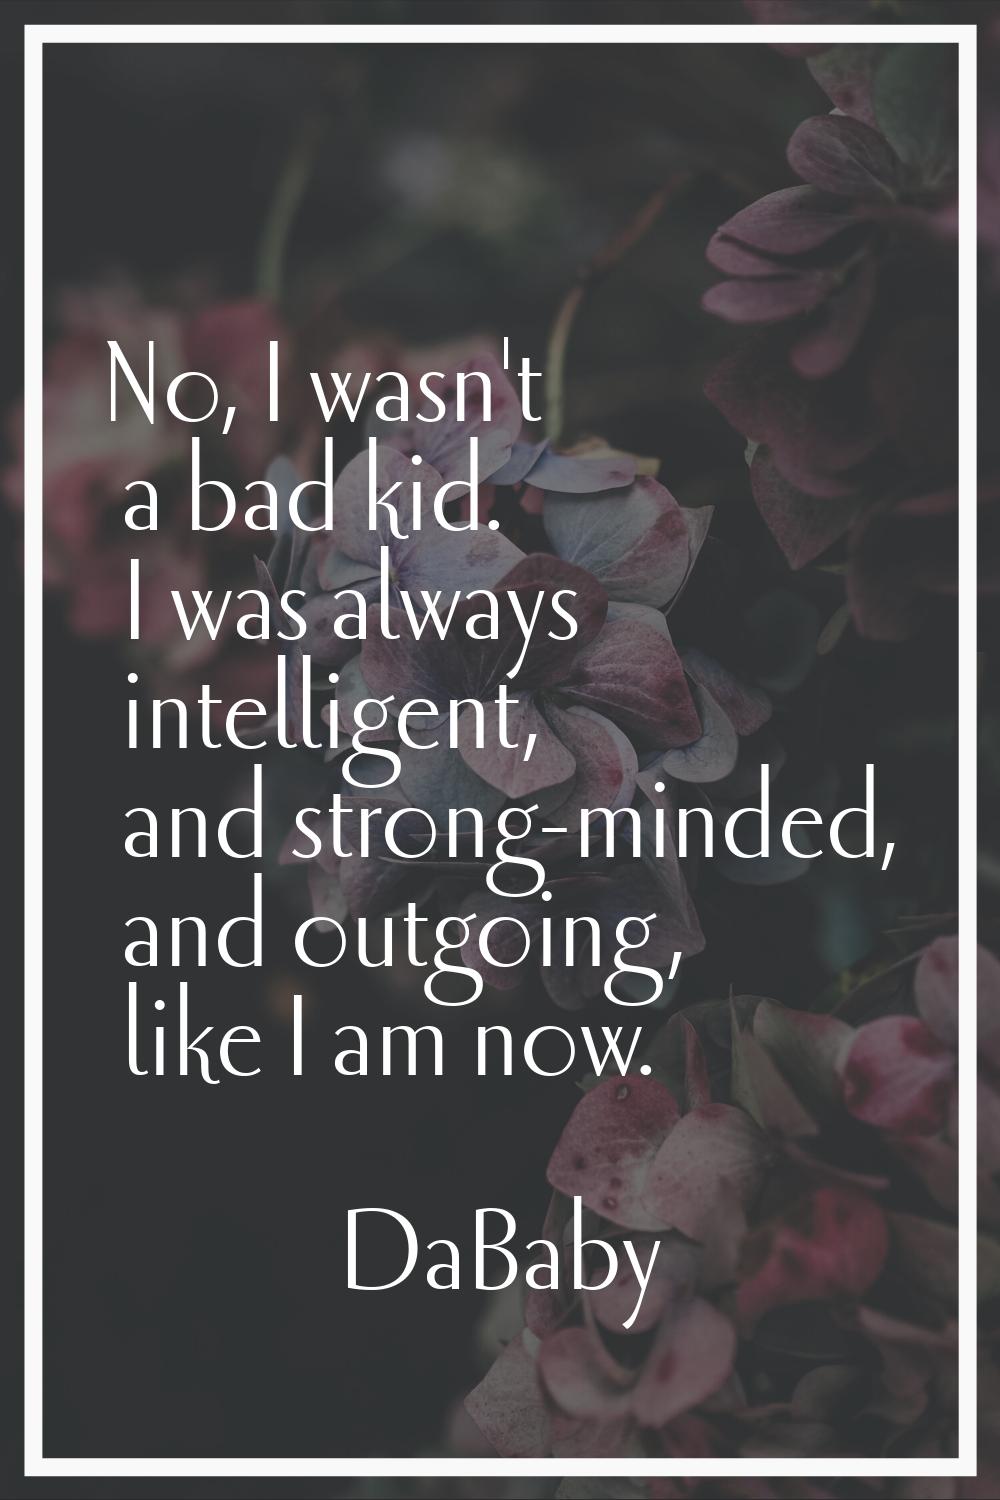 No, I wasn't a bad kid. I was always intelligent, and strong-minded, and outgoing, like I am now.